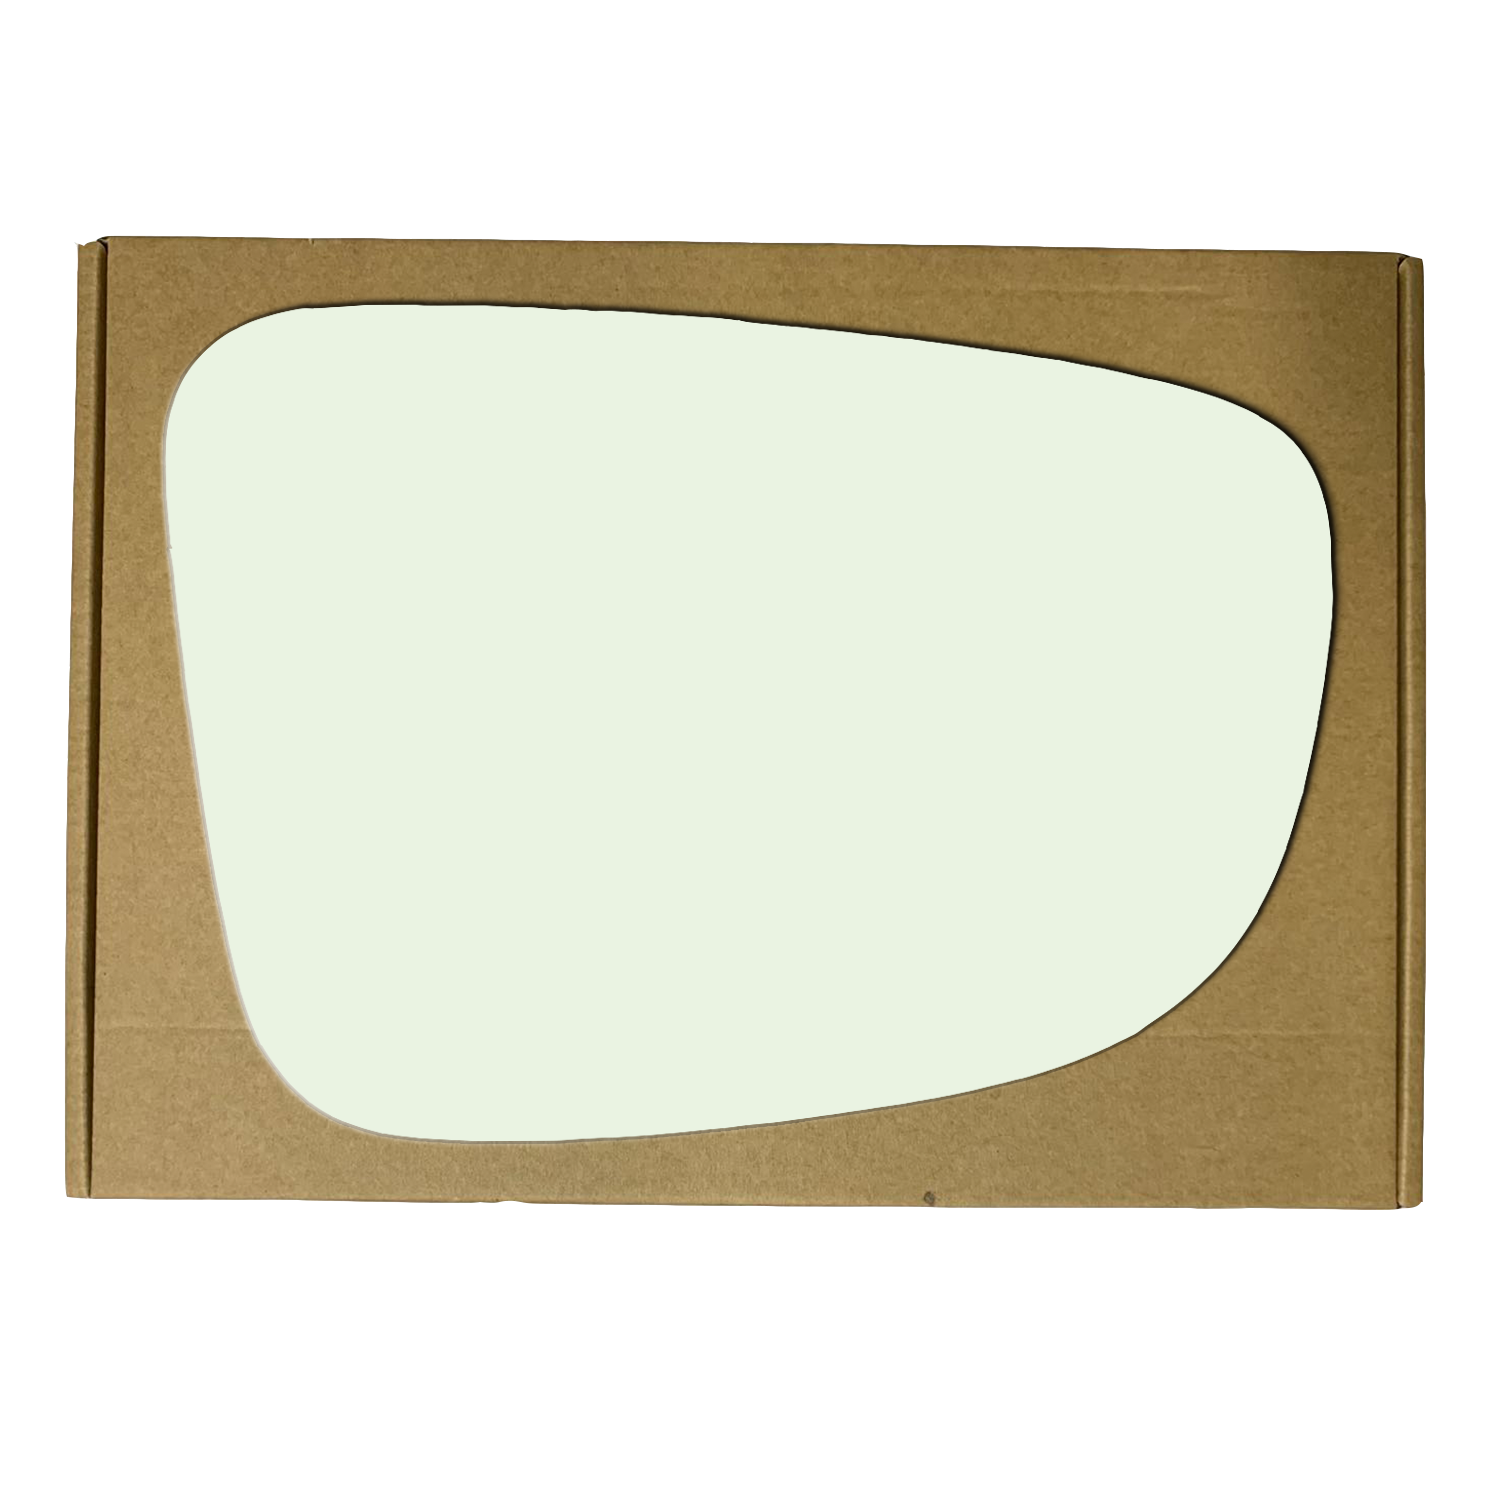 WLLW Replacement Mirror Glass for 2014-2018 Mazda 3/2016 Scion iA/2017-2018 Toyota Yaris iA, Driver Left Side LH/Passenger Right Side RH/The Both Sides Flat Convex M-0074